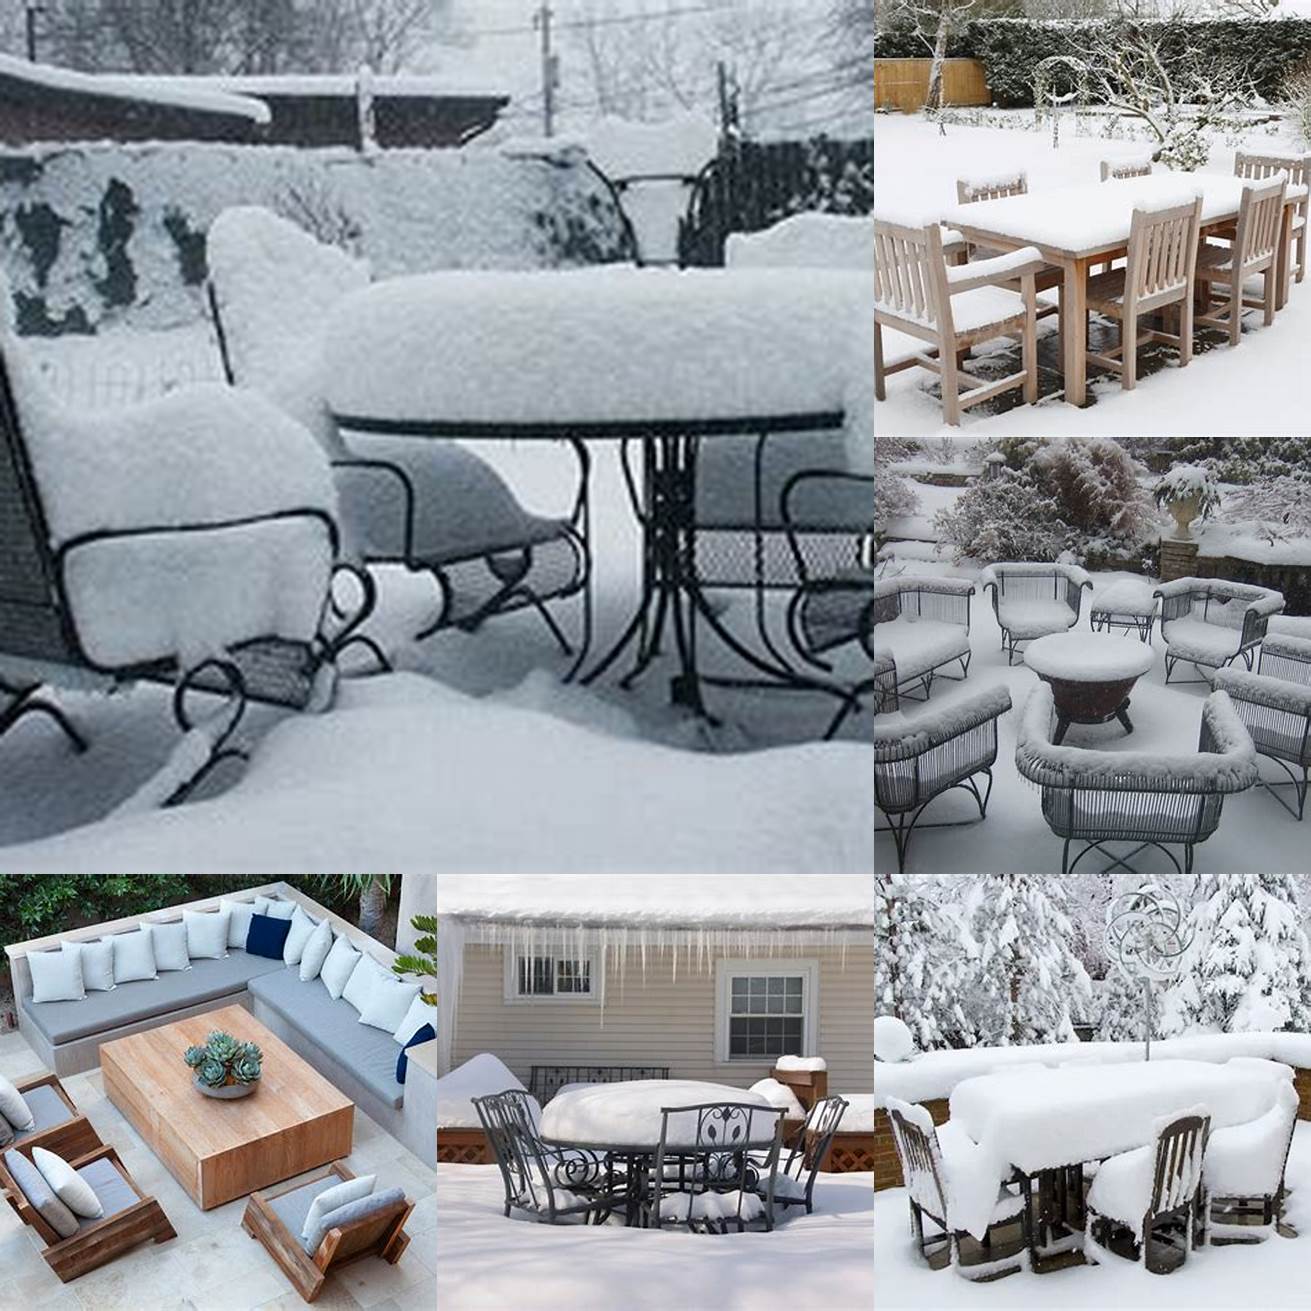 Avoid leaving furniture outdoors during winter